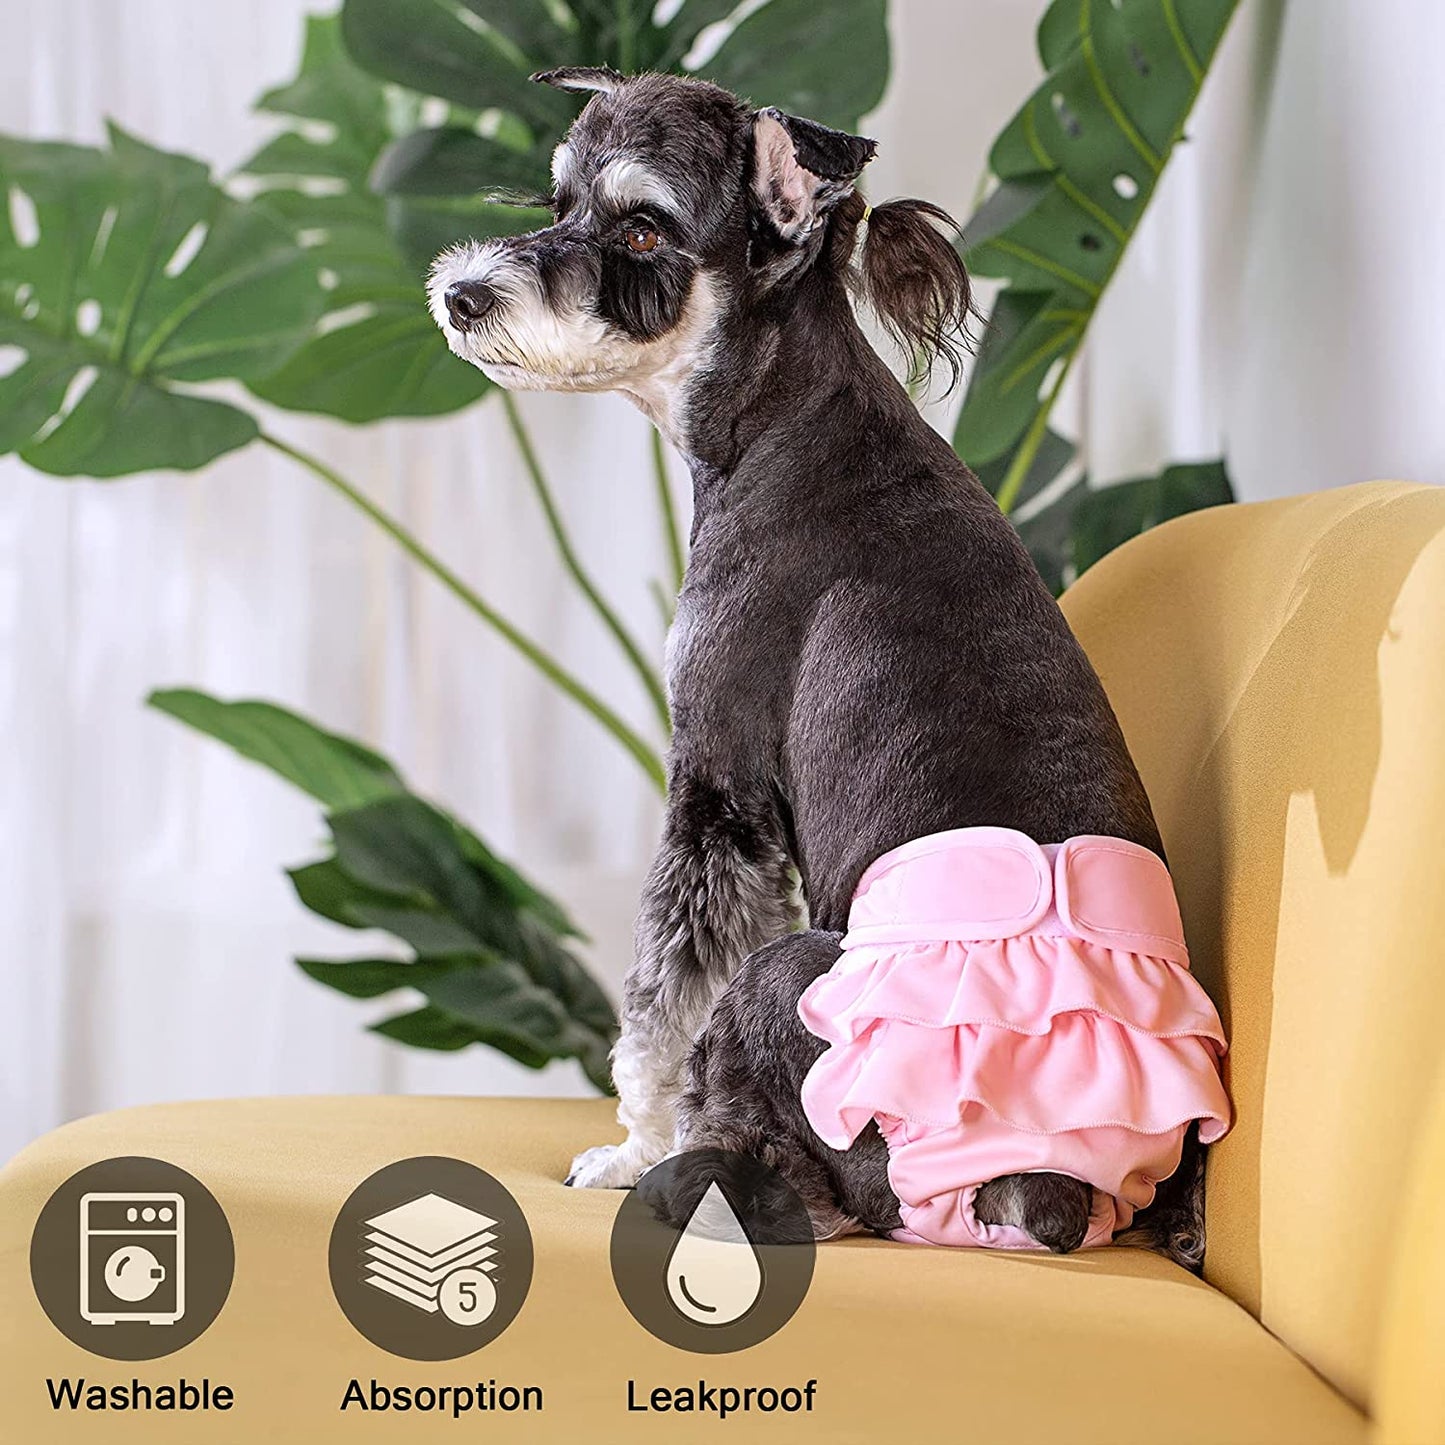 Stylish Washable Female Dog Diapers Period Menstrual Wraps Pants Reusable Doggie Puppy Pet Clothes Highly Absorbent